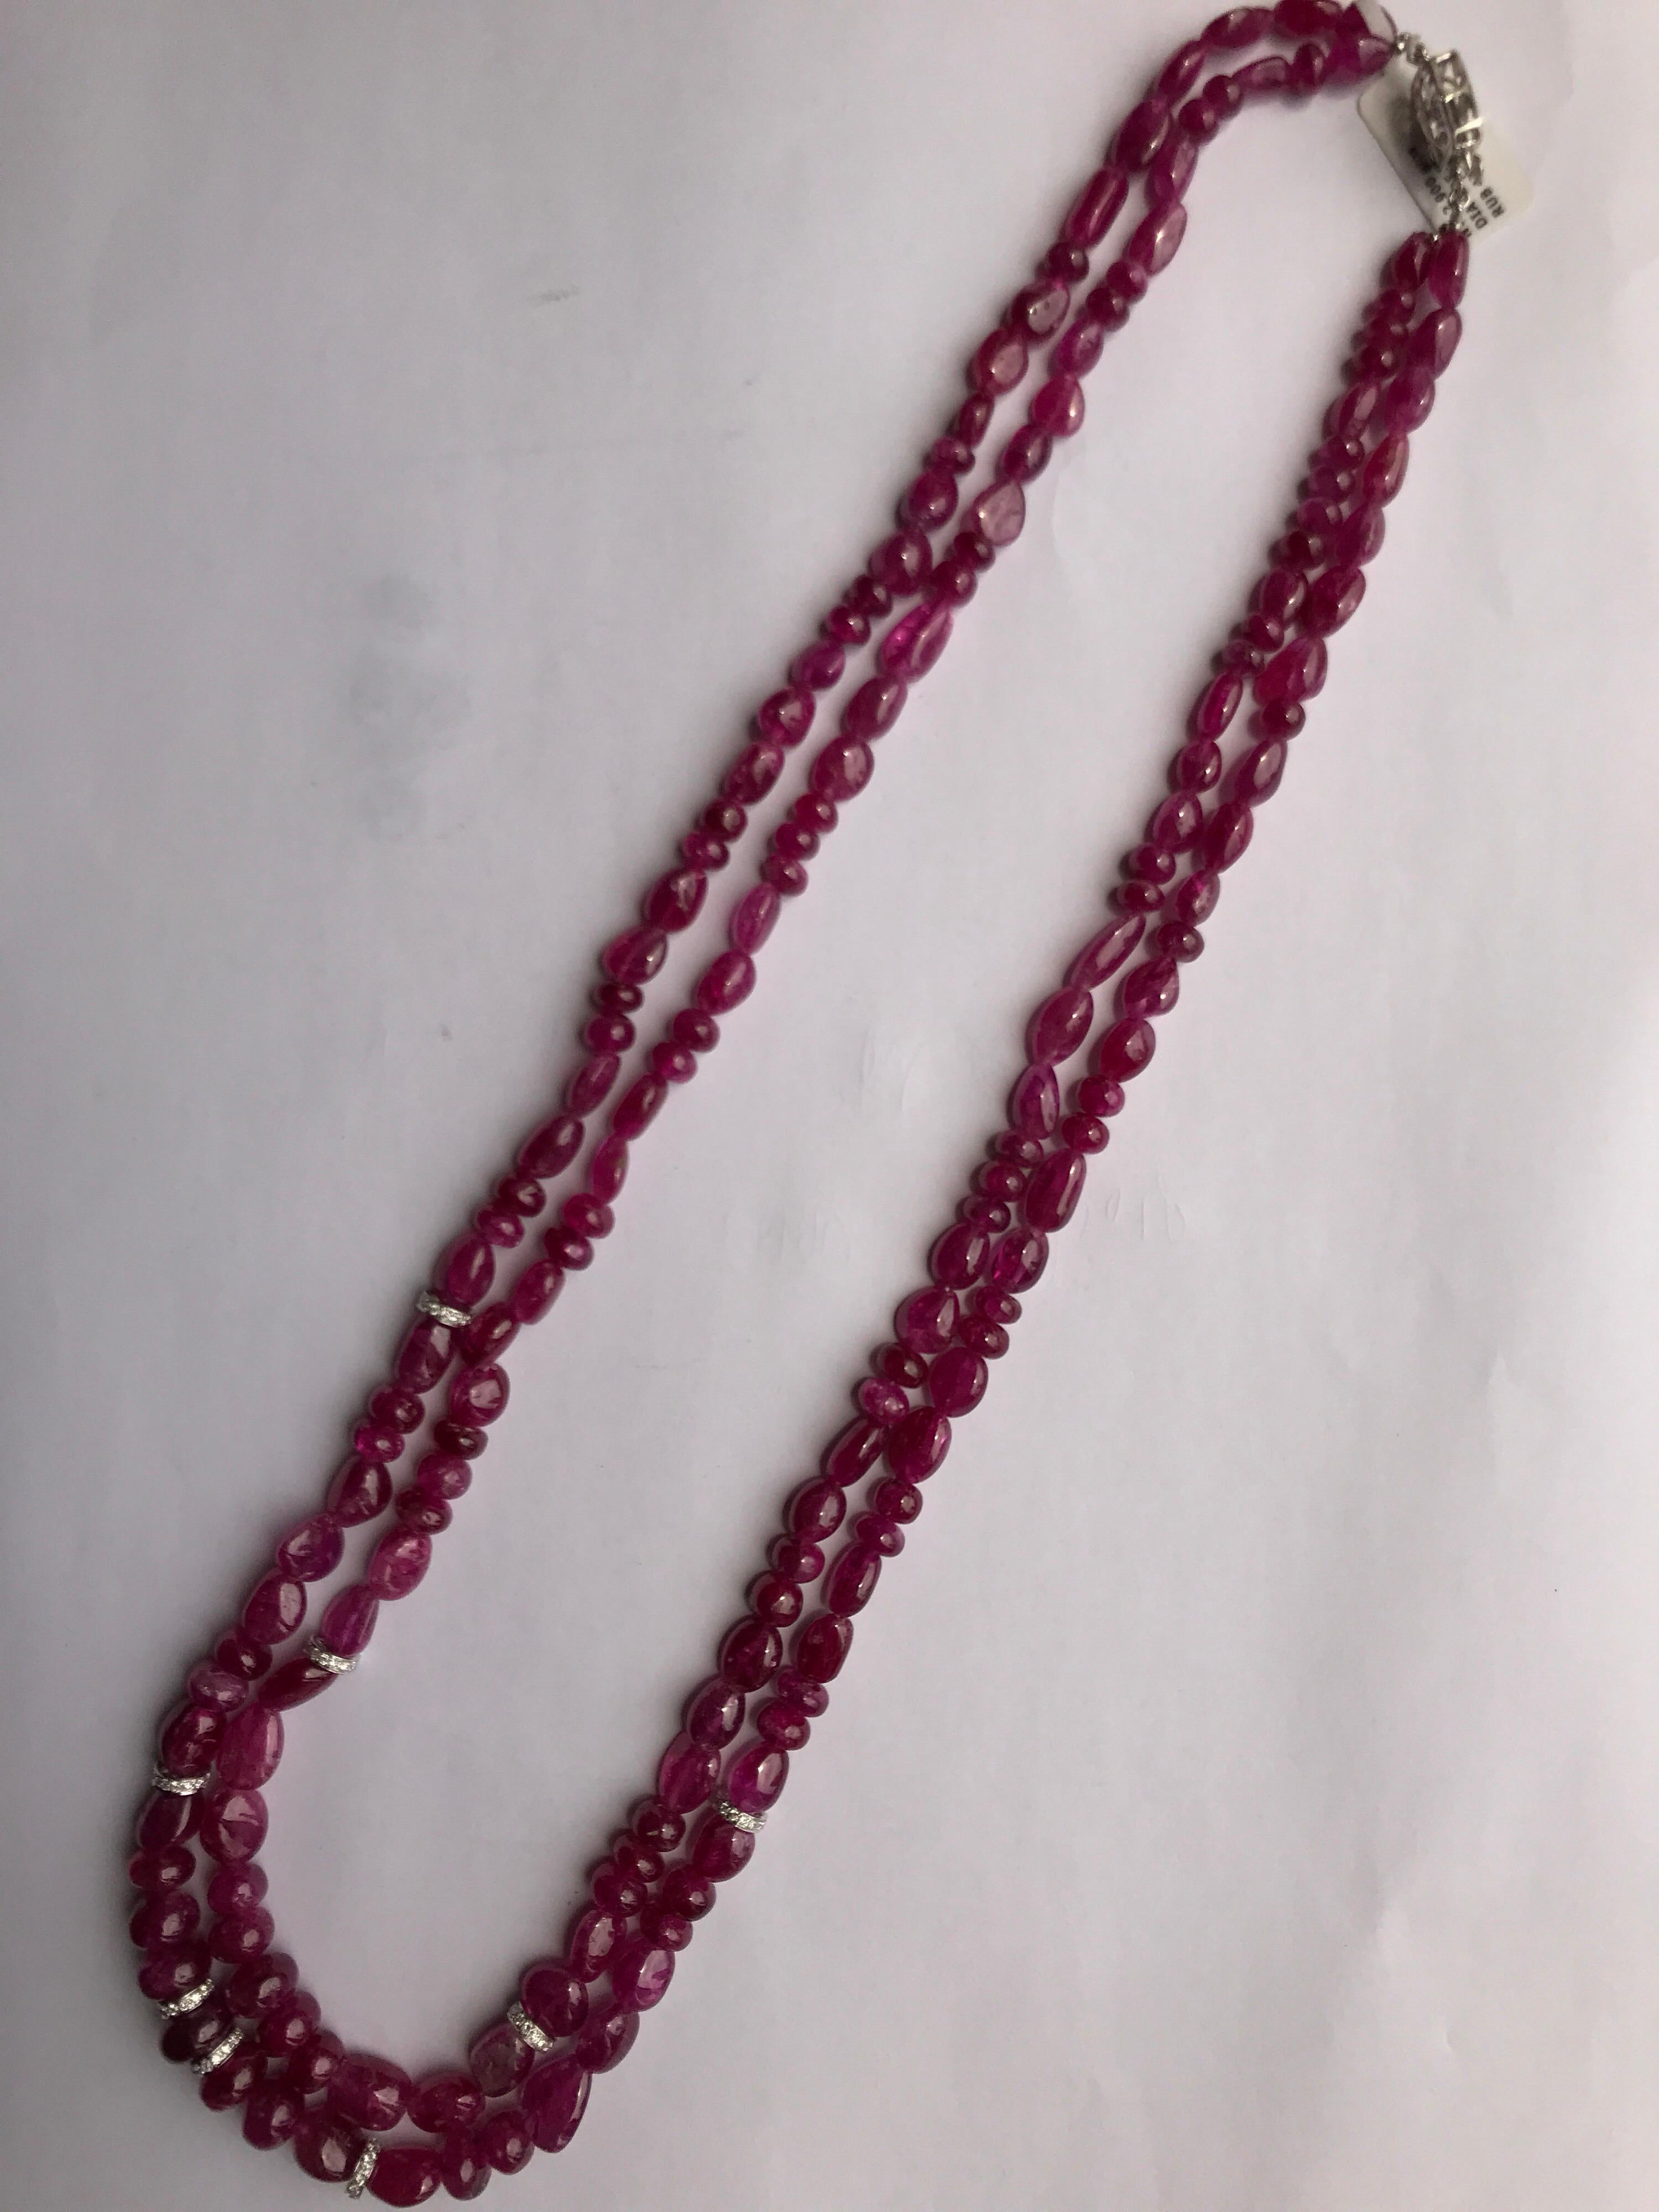 A rare multi strand necklace, consisting of 475.18 carats tumble shaped natural Burma Ruby beads. Without any kind of enhancement (heated/treated). The look of the beads is enhanced by adding gold and diamond rondelle spacers. Certificate can be